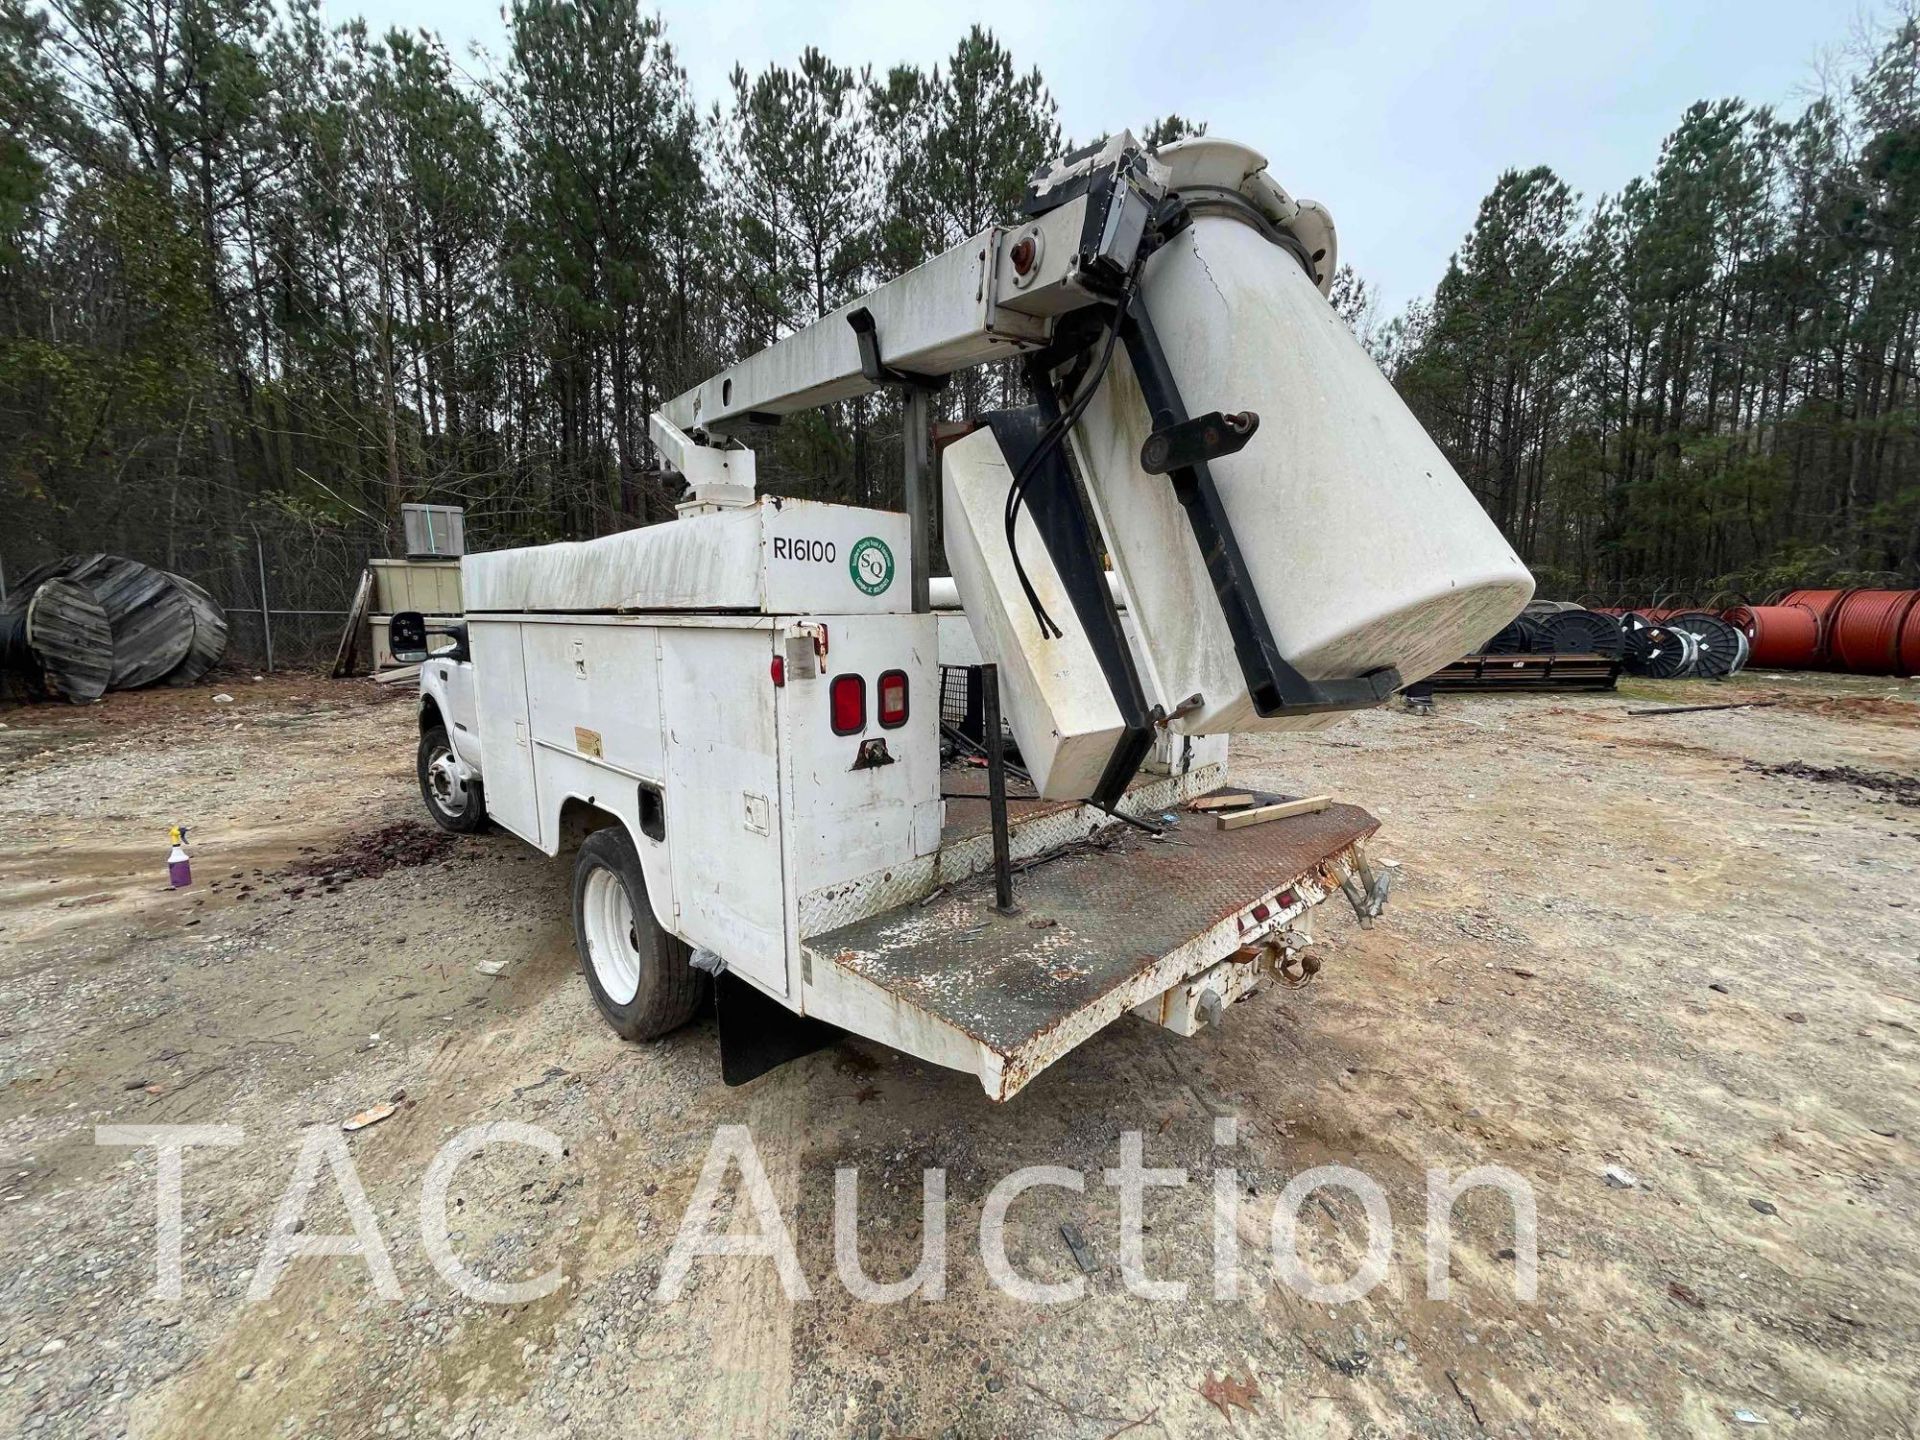 2000 Ford F450 Super Duty Bucket Truck - Image 6 of 68